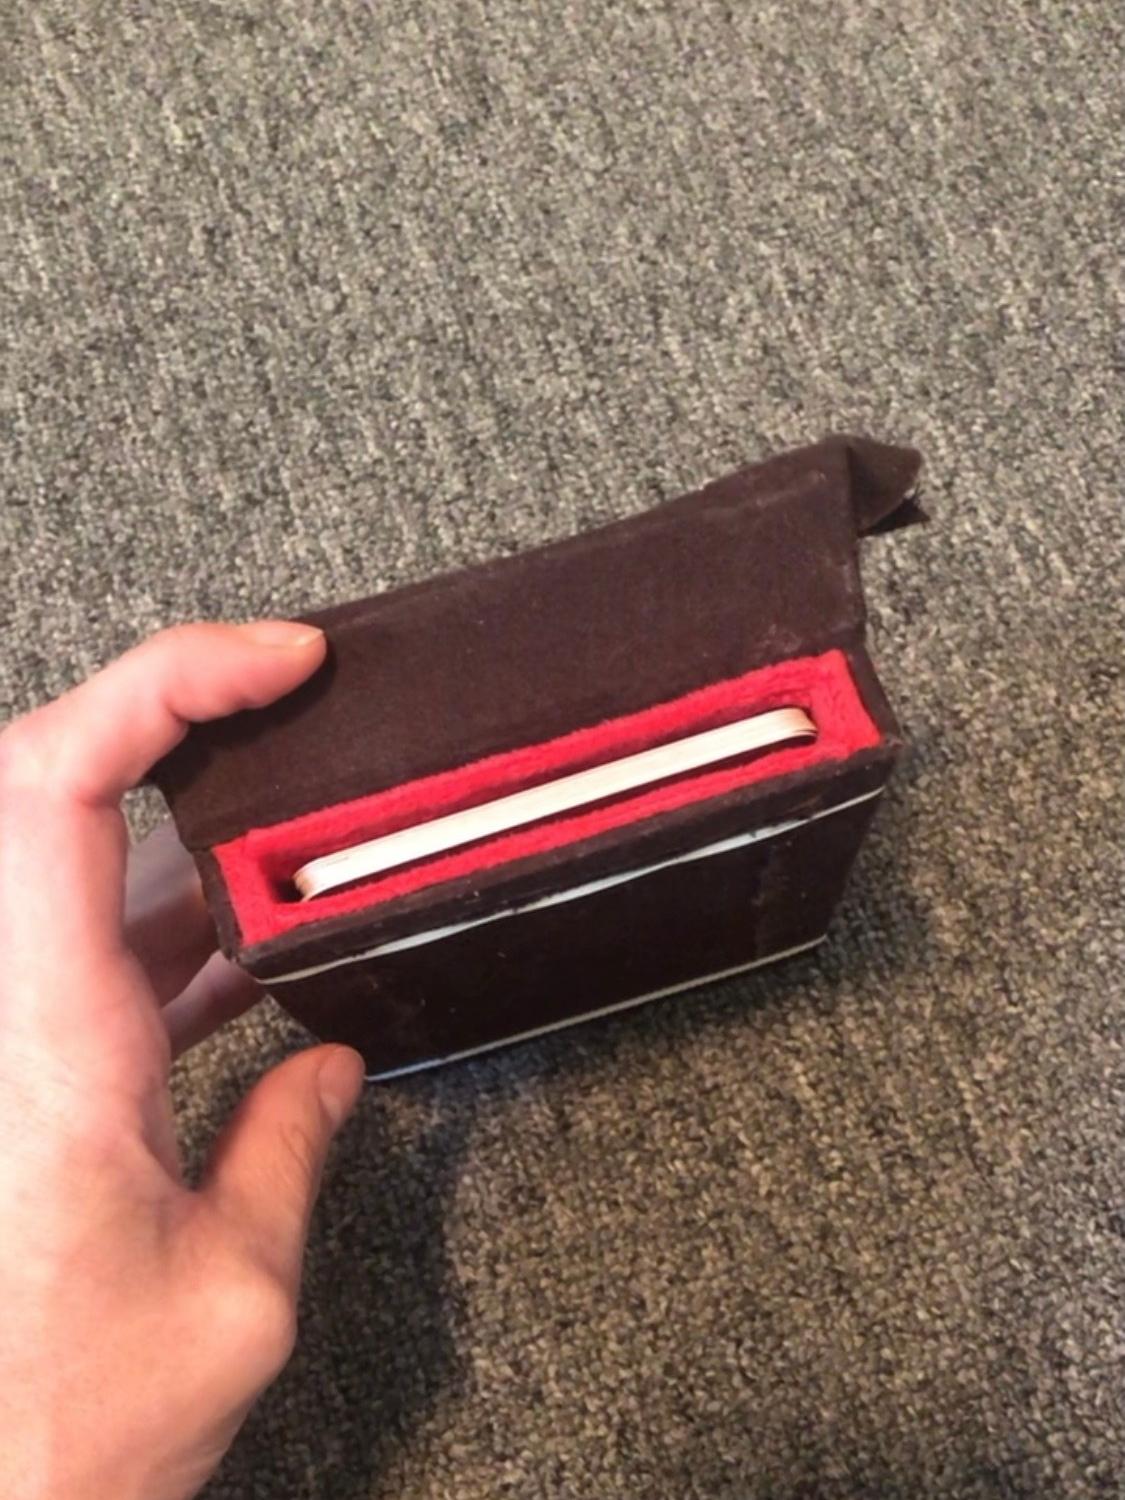 The box, now completely closed up, being held together with white elastics. The box is brown on the outside with the lip of a red lining showing, with the cards inside. It looks a little bit like a mouth, kinda muppet-like or something.